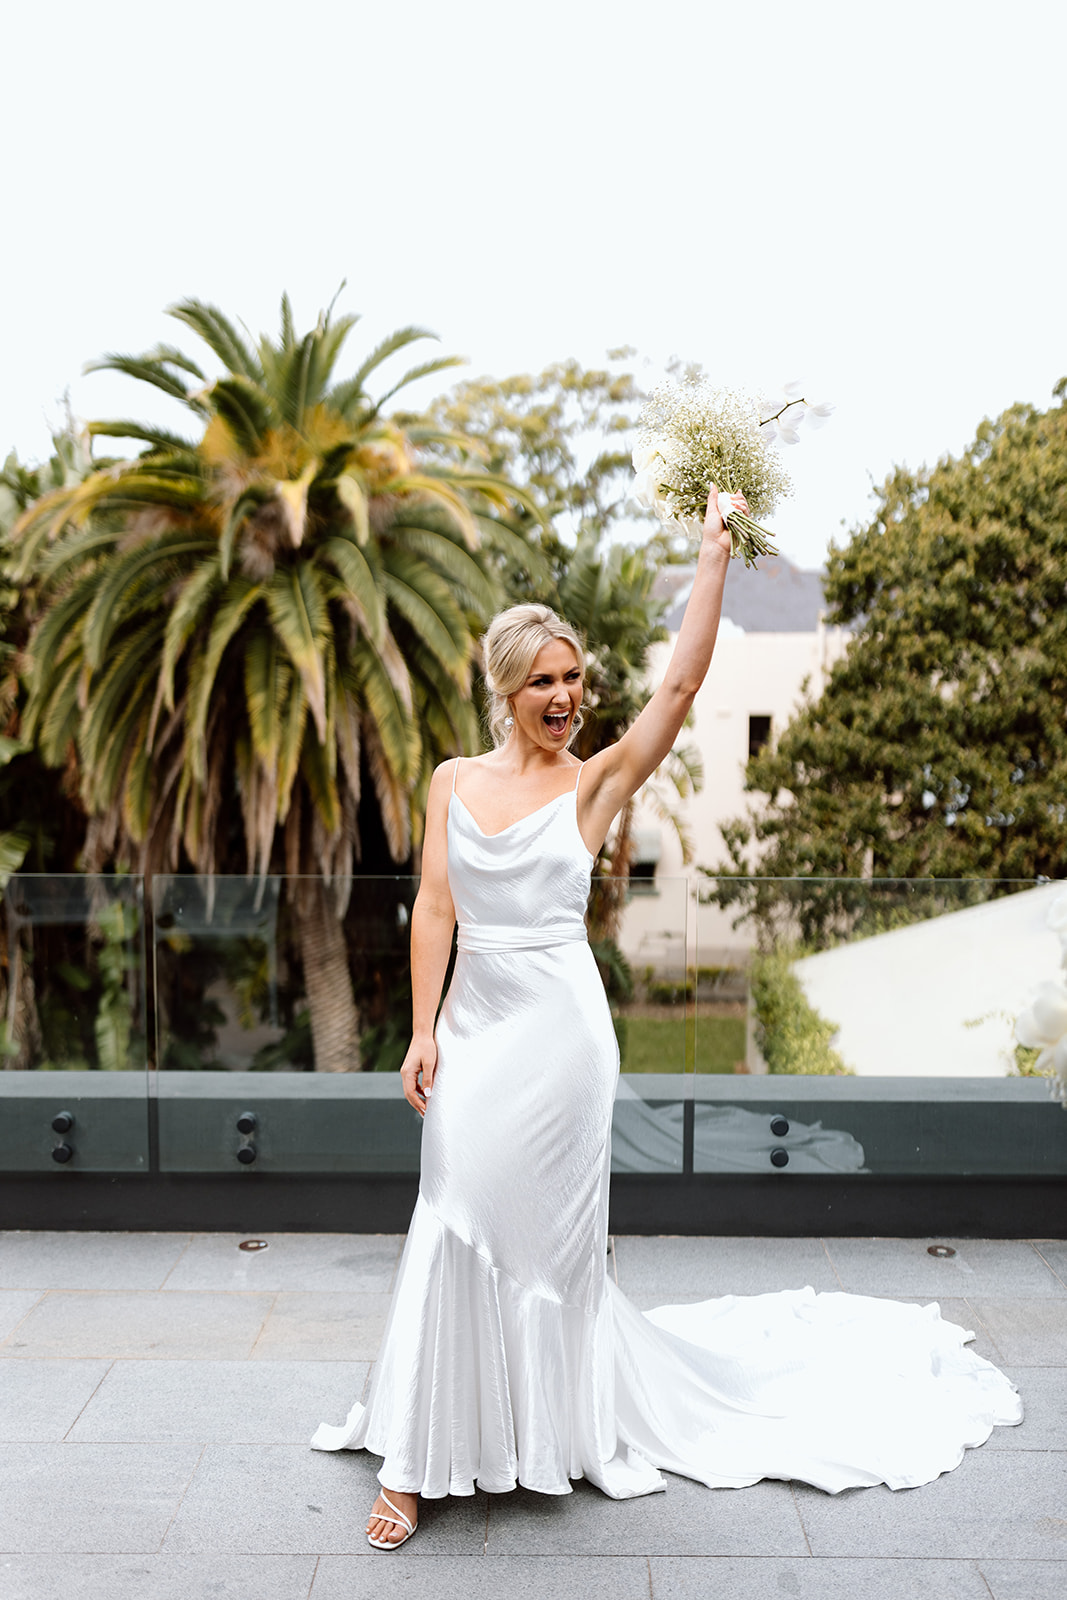 Portraits of the bride at the wedding in The Fernery Mosman